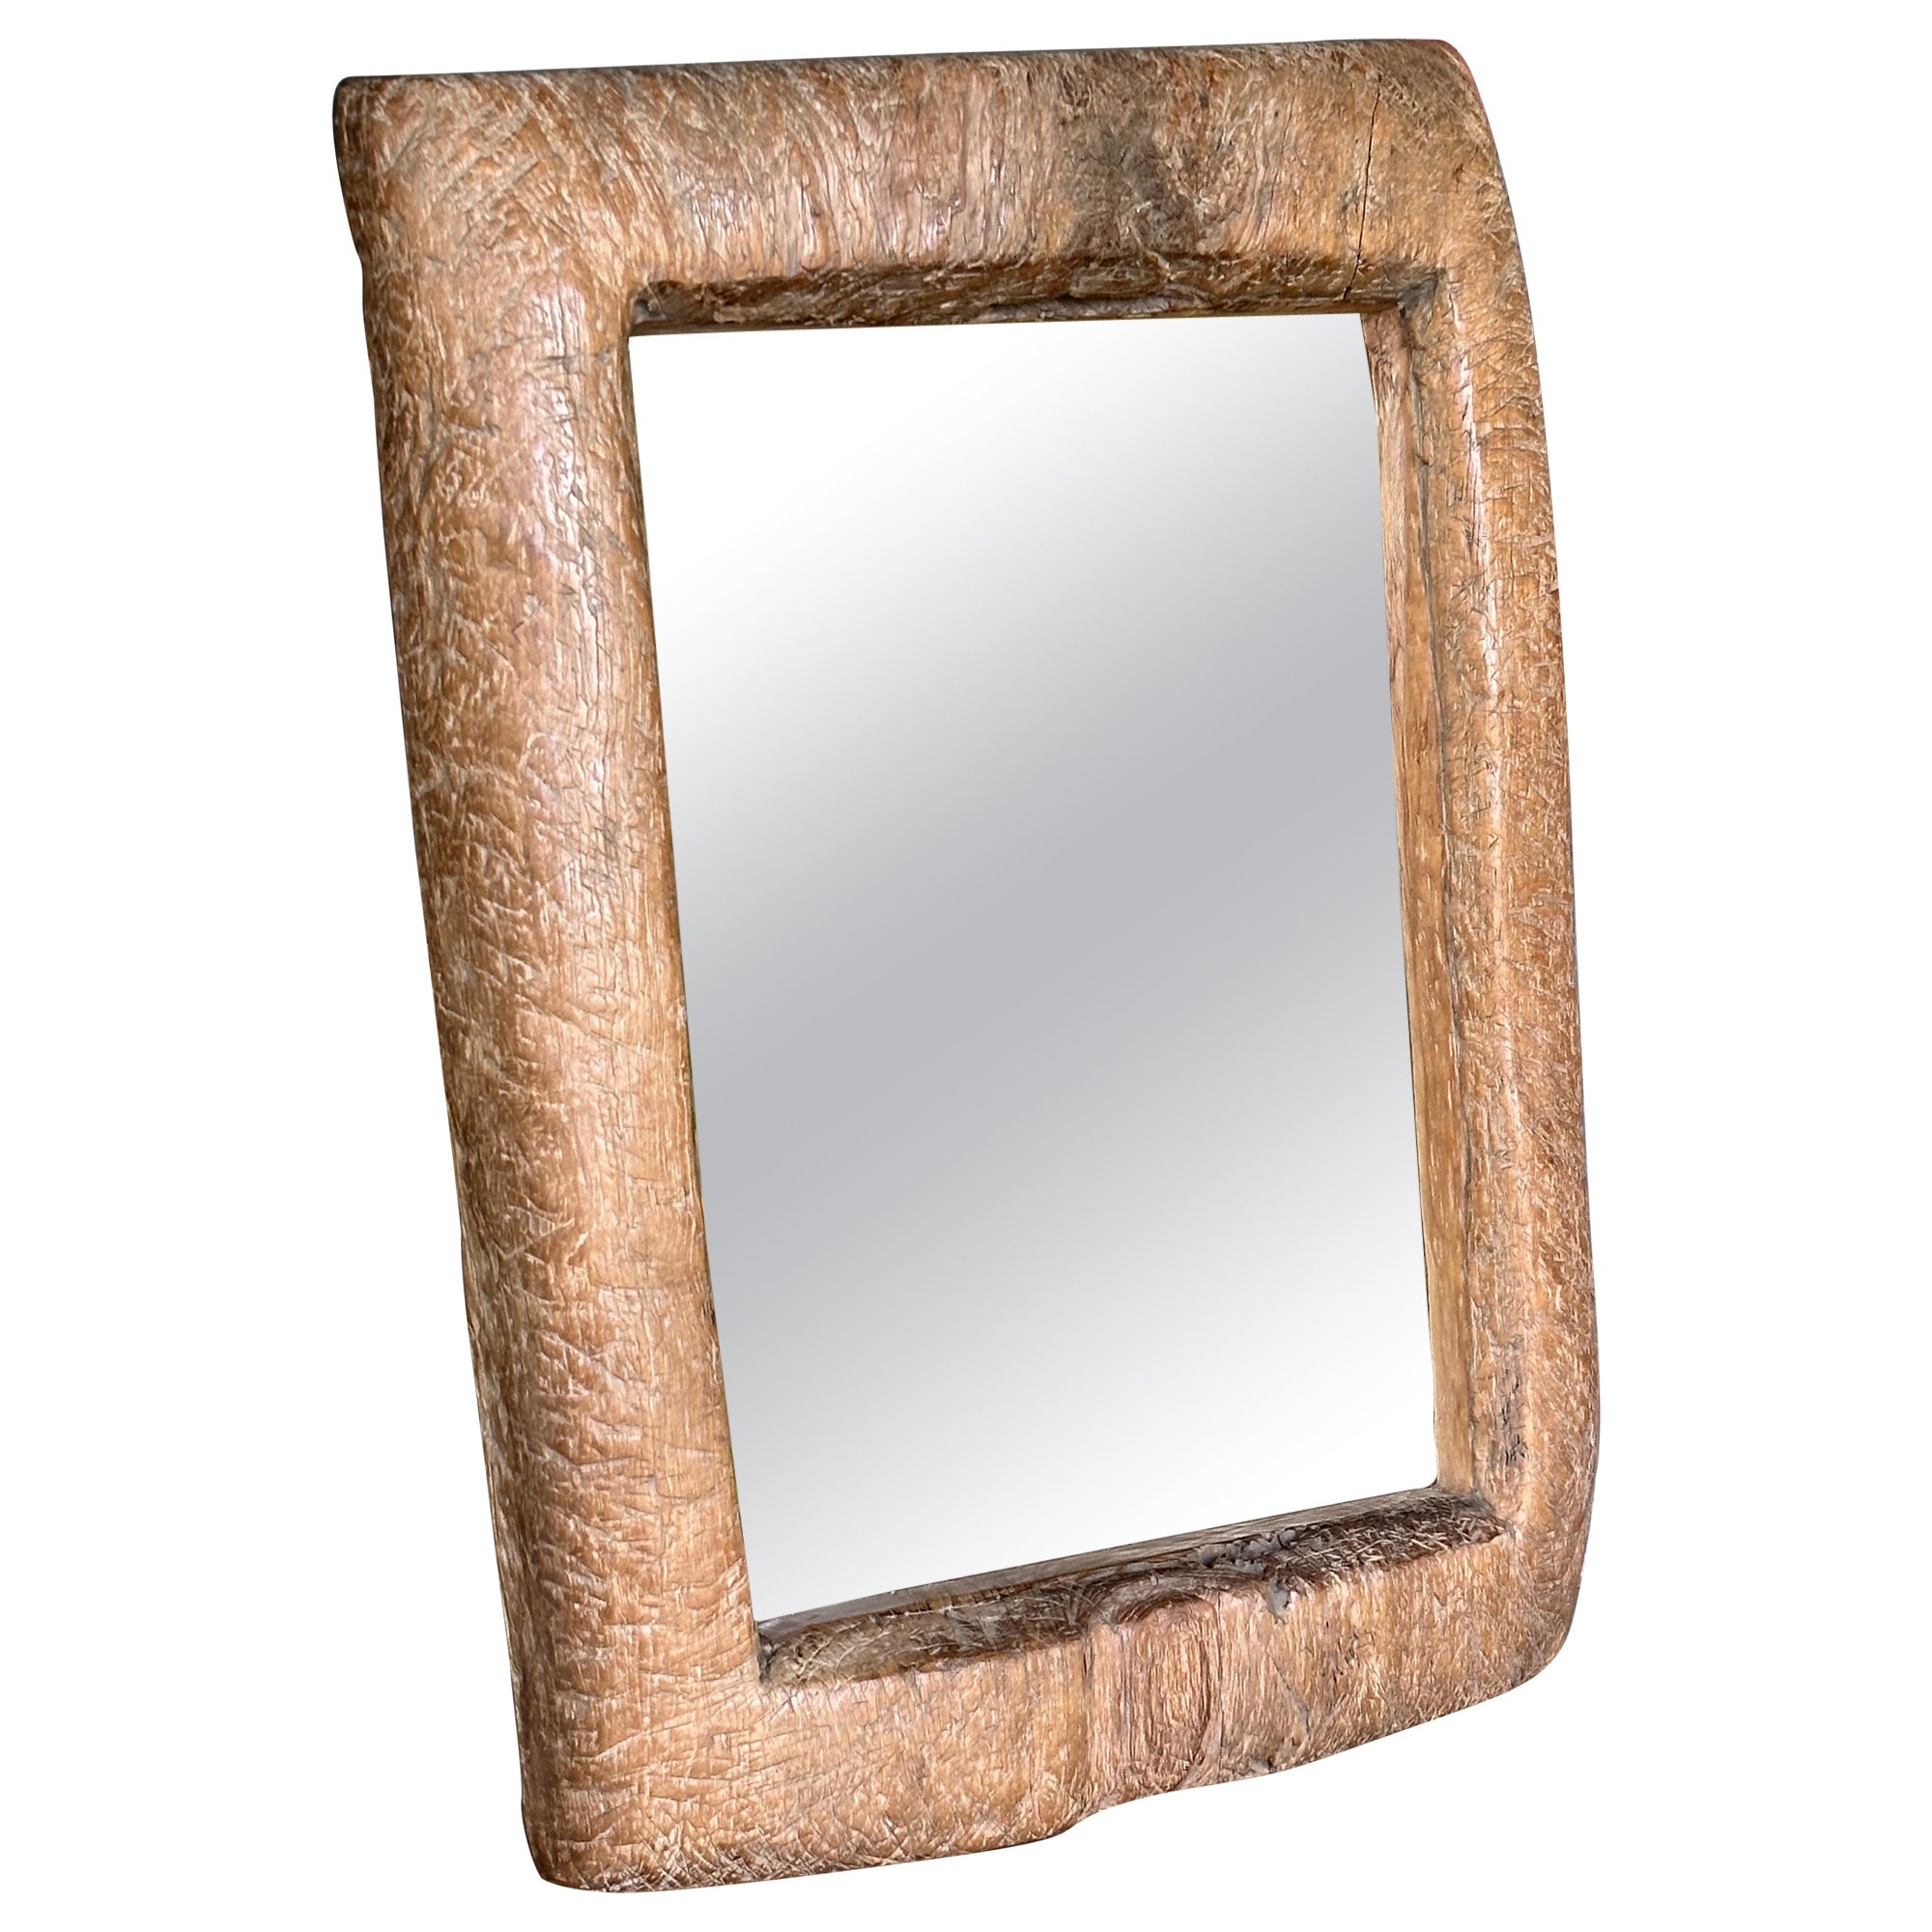 Rustic Teak Wood Mirror With Wonderful Age Related Patina & Markings For Sale